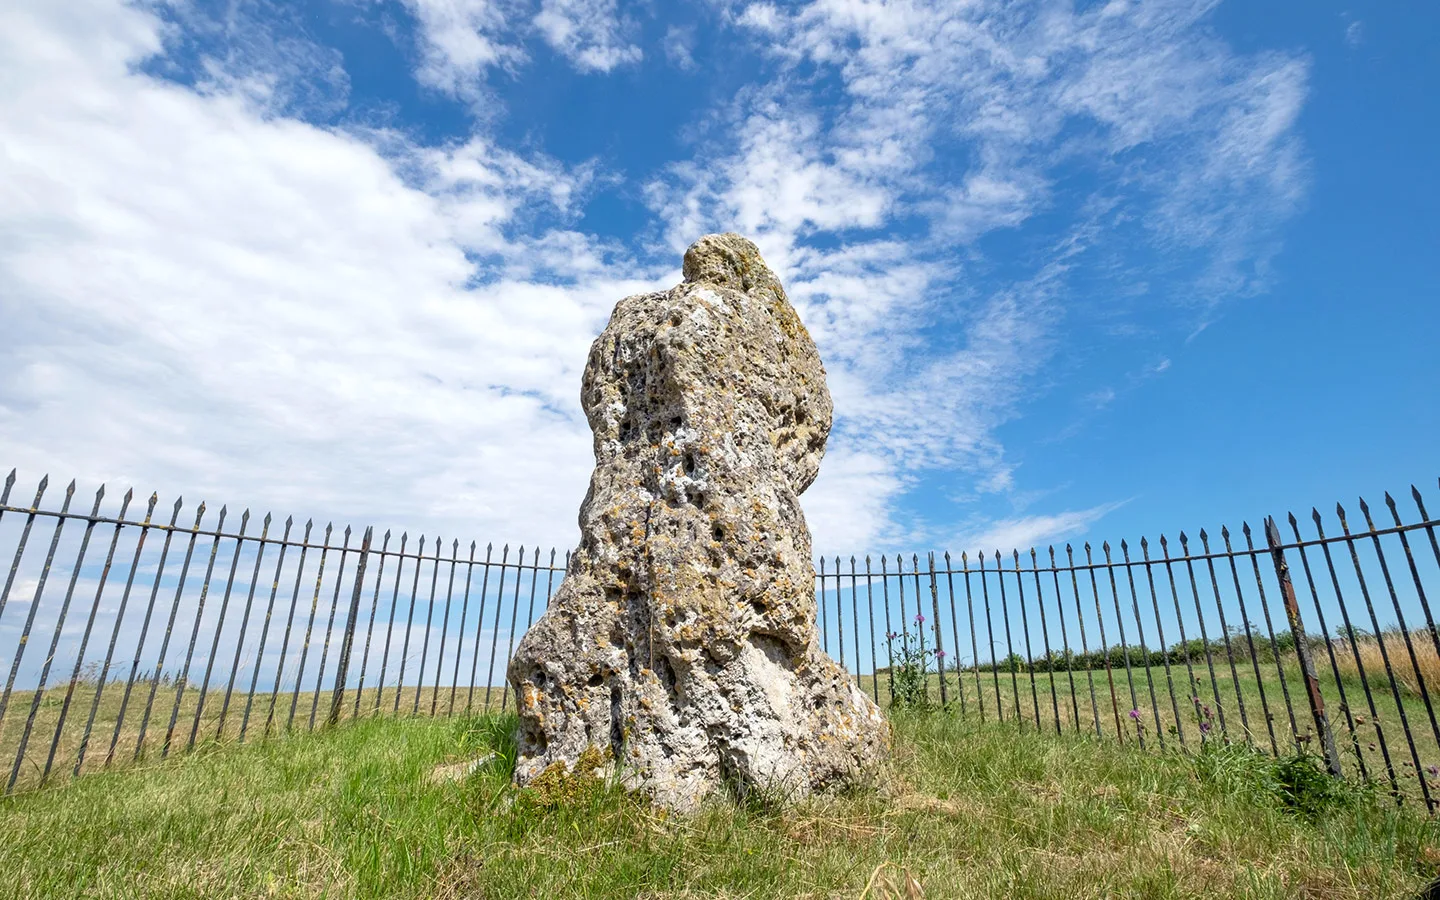 The King's Stone at the Rollright Stones